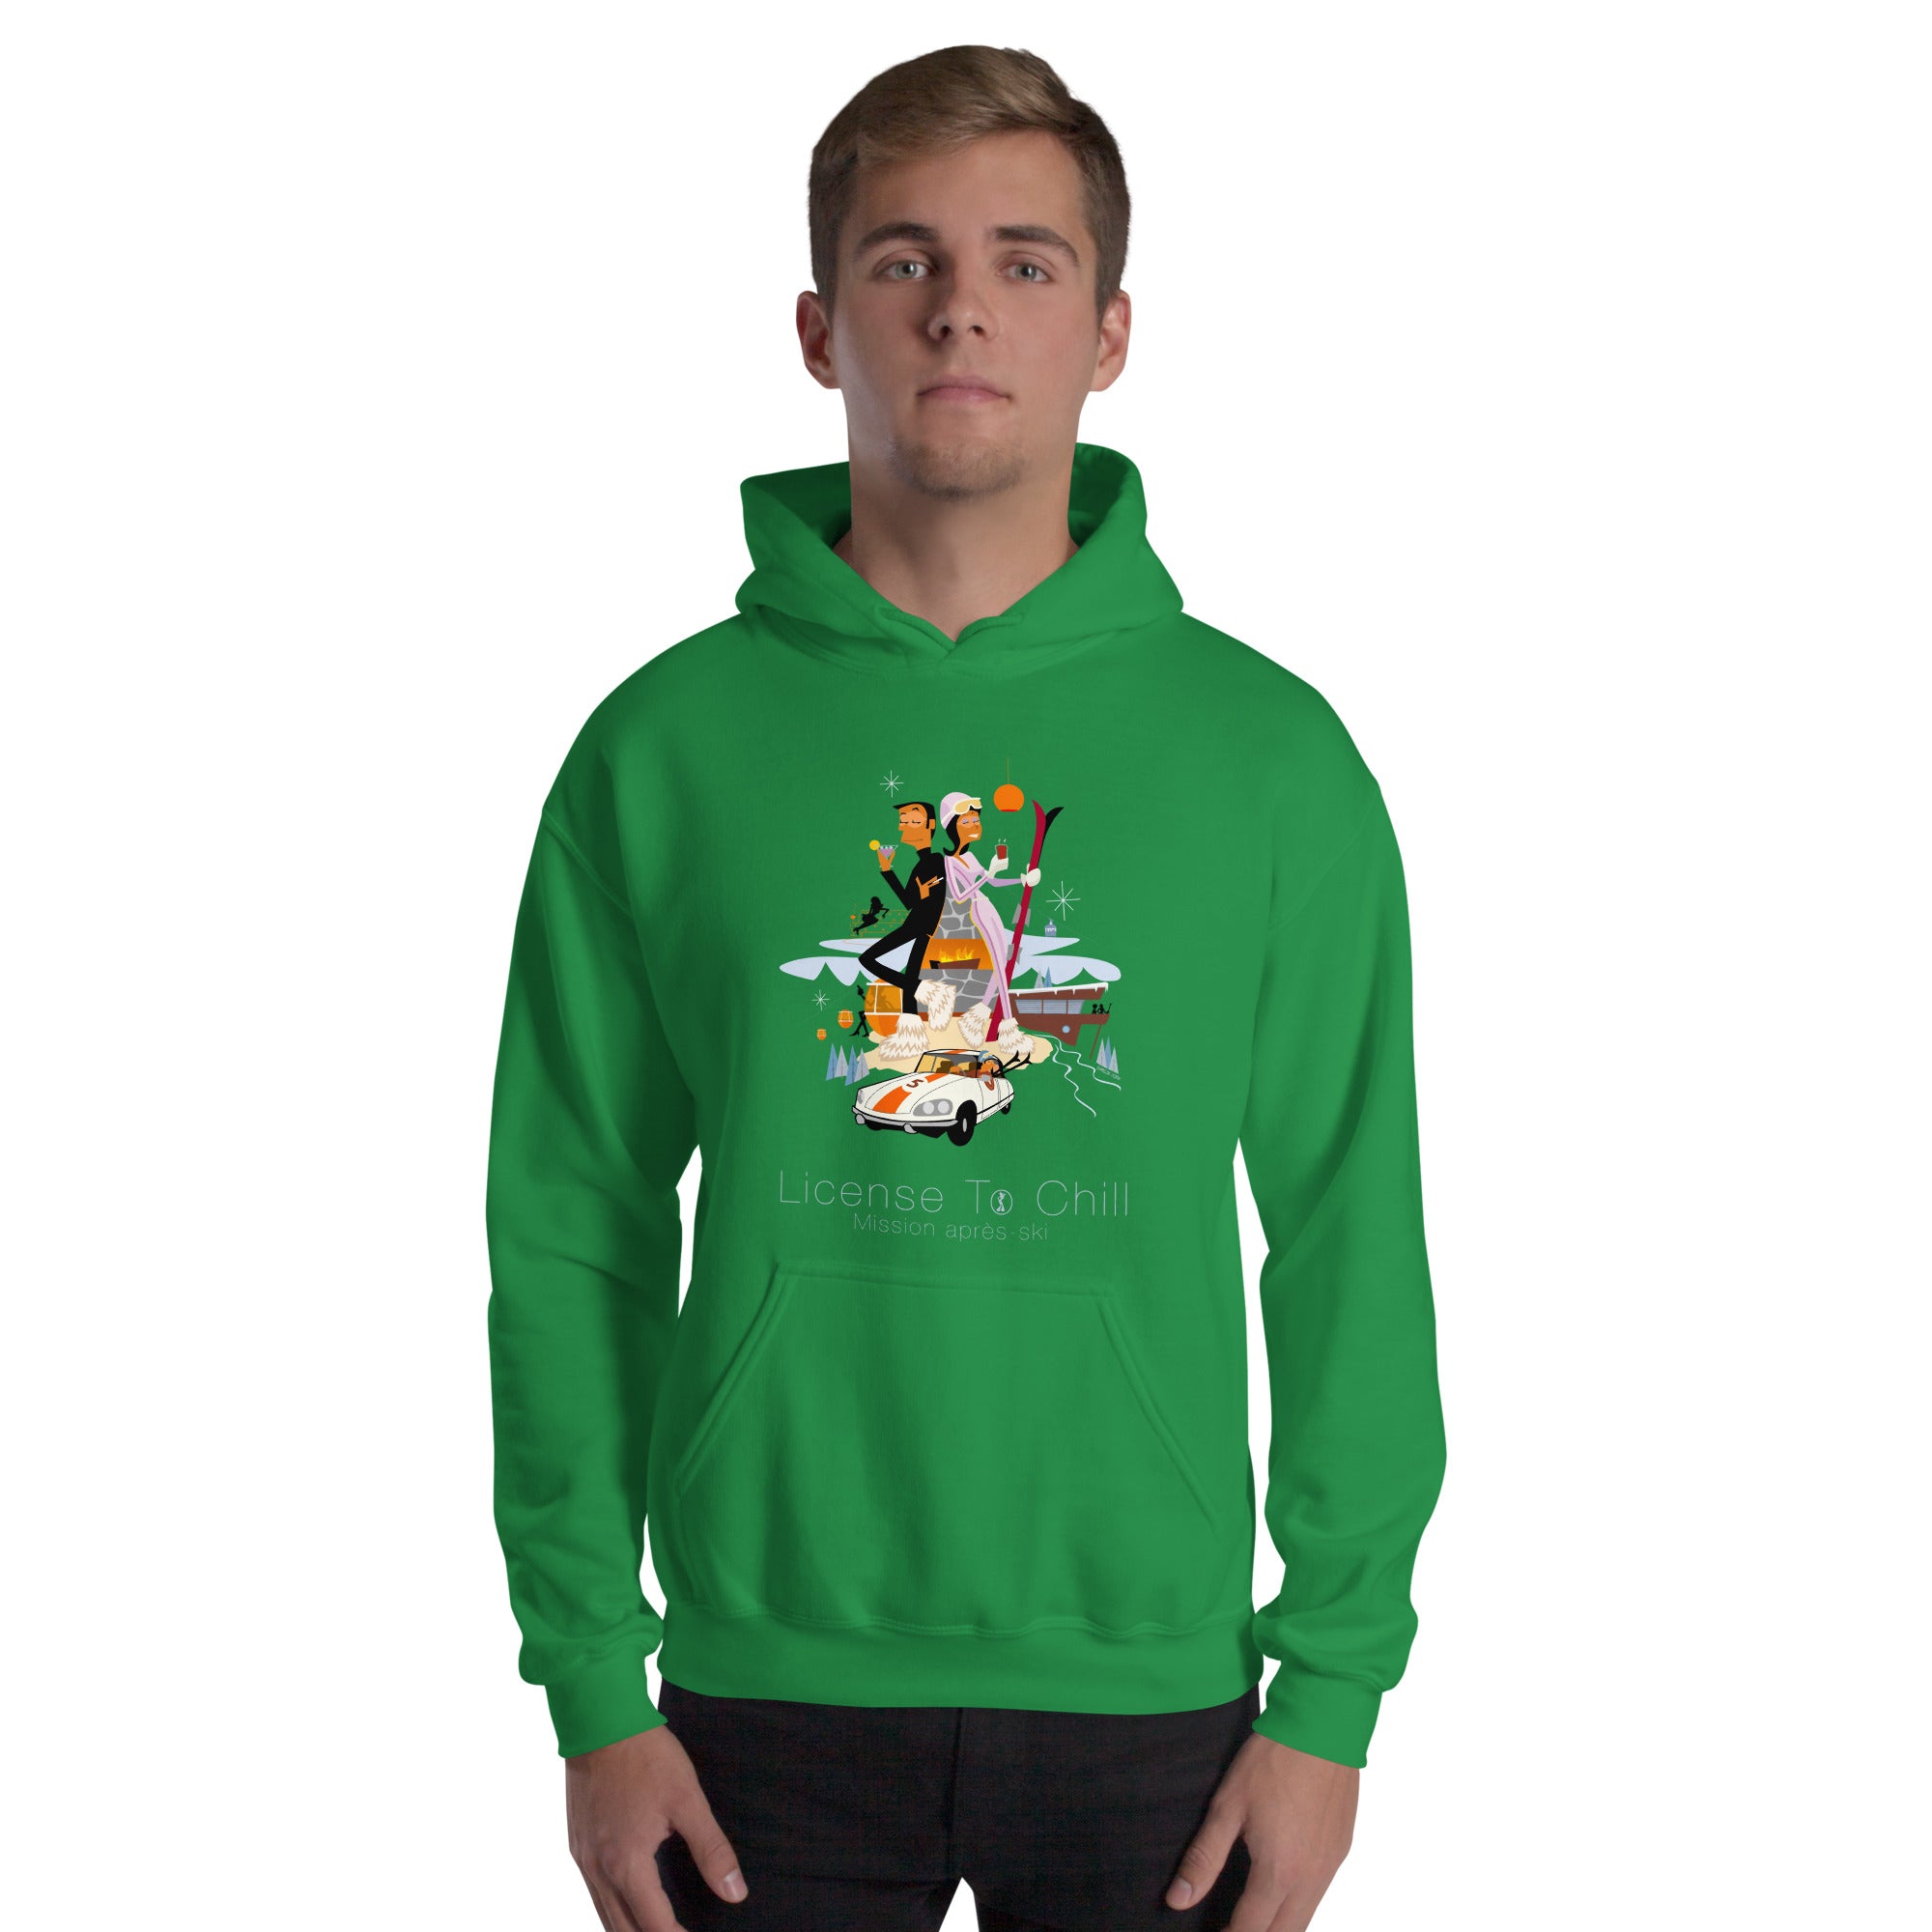 Unisex Hoodie License To Chill Mission Après-Ski on bright colors